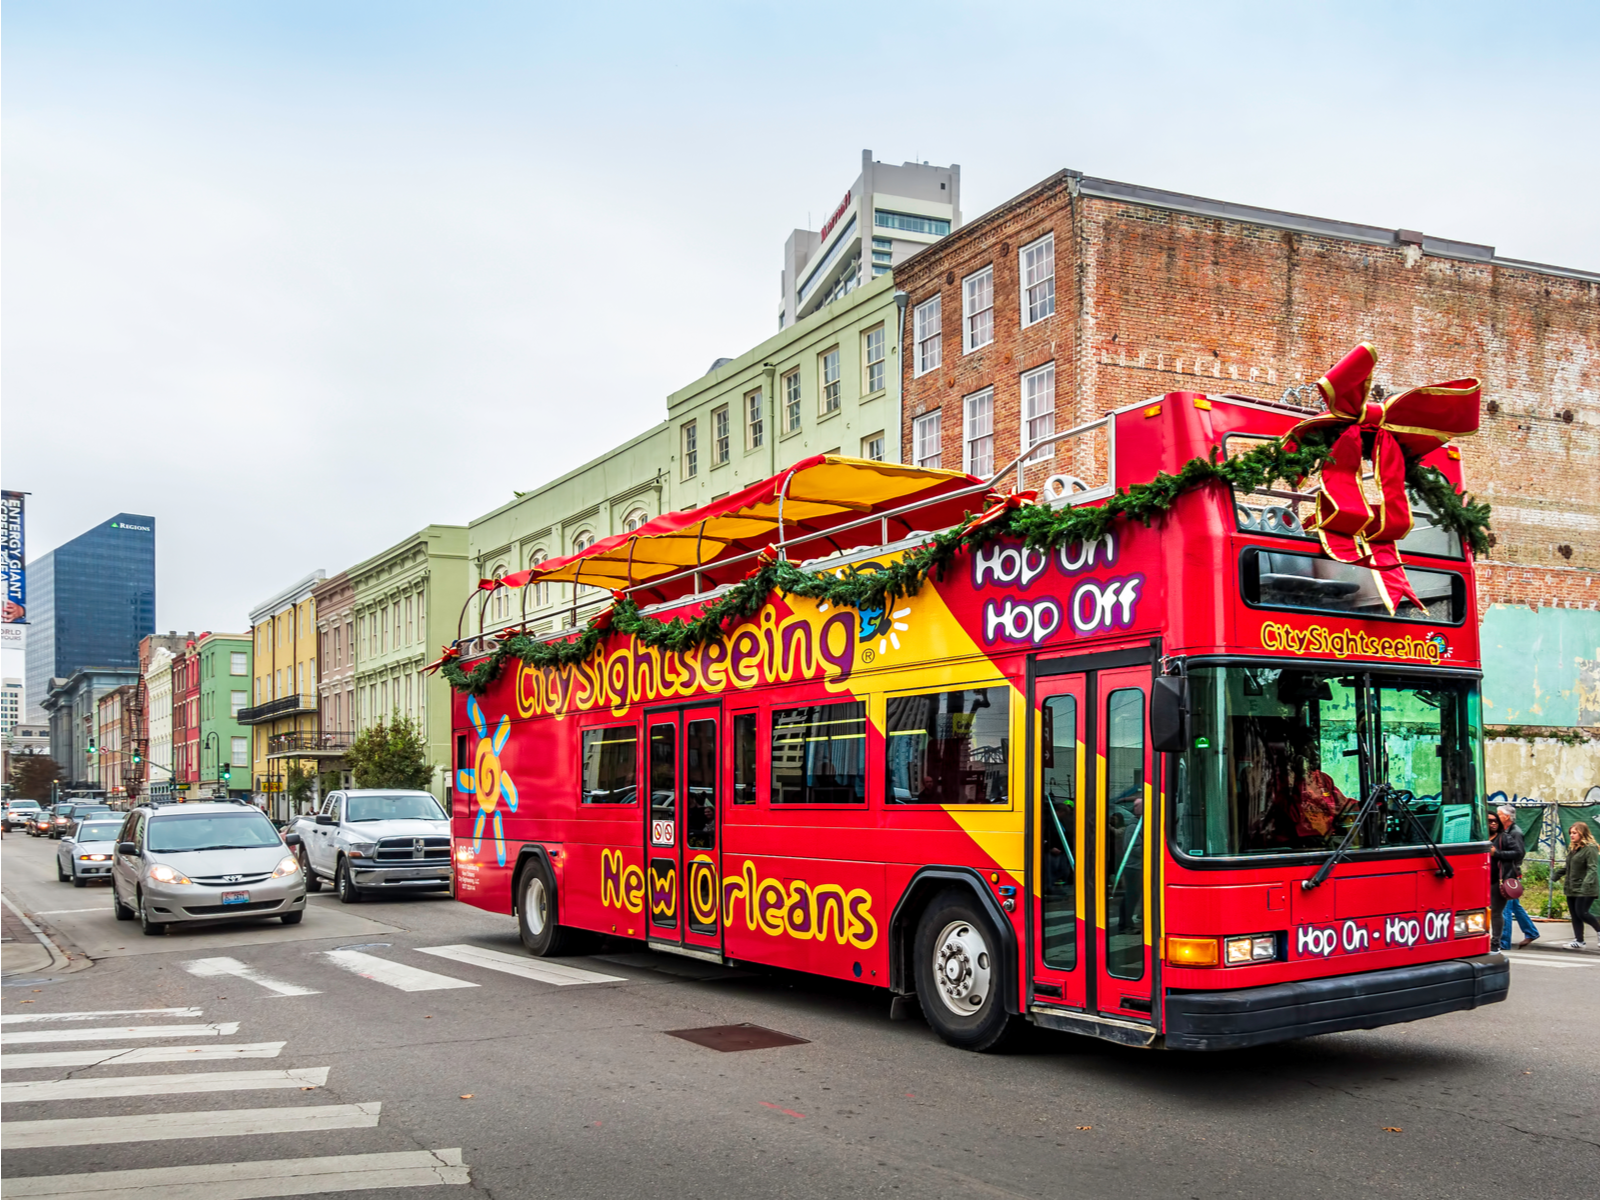 Classic double-decker bus in New Orleans